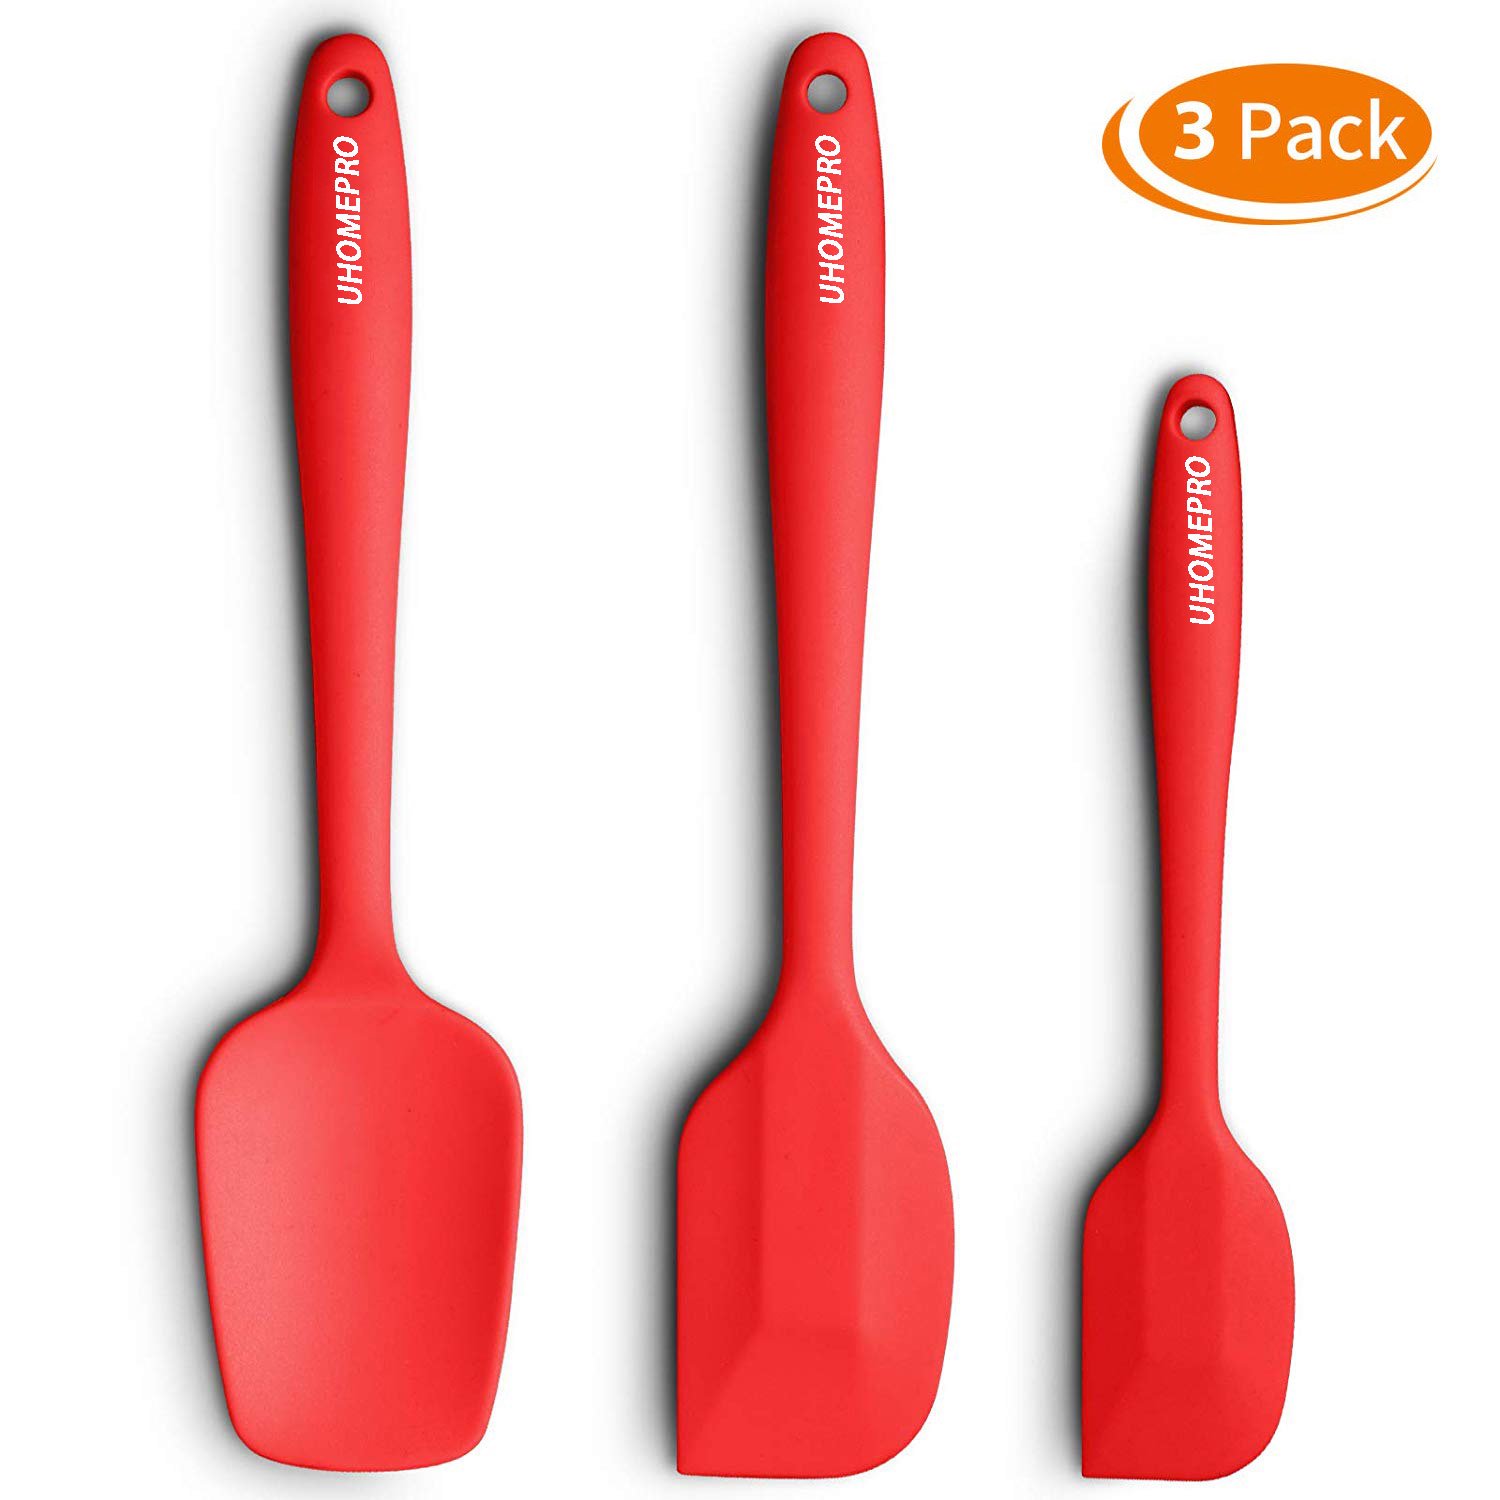 Silicone Spatula 3-piece Set, High Heat-Resistant Pro-Grade Spatulas, Non-stick Rubber Spatulas with Stainless Steel Core, Red, I2341 - image 1 of 7